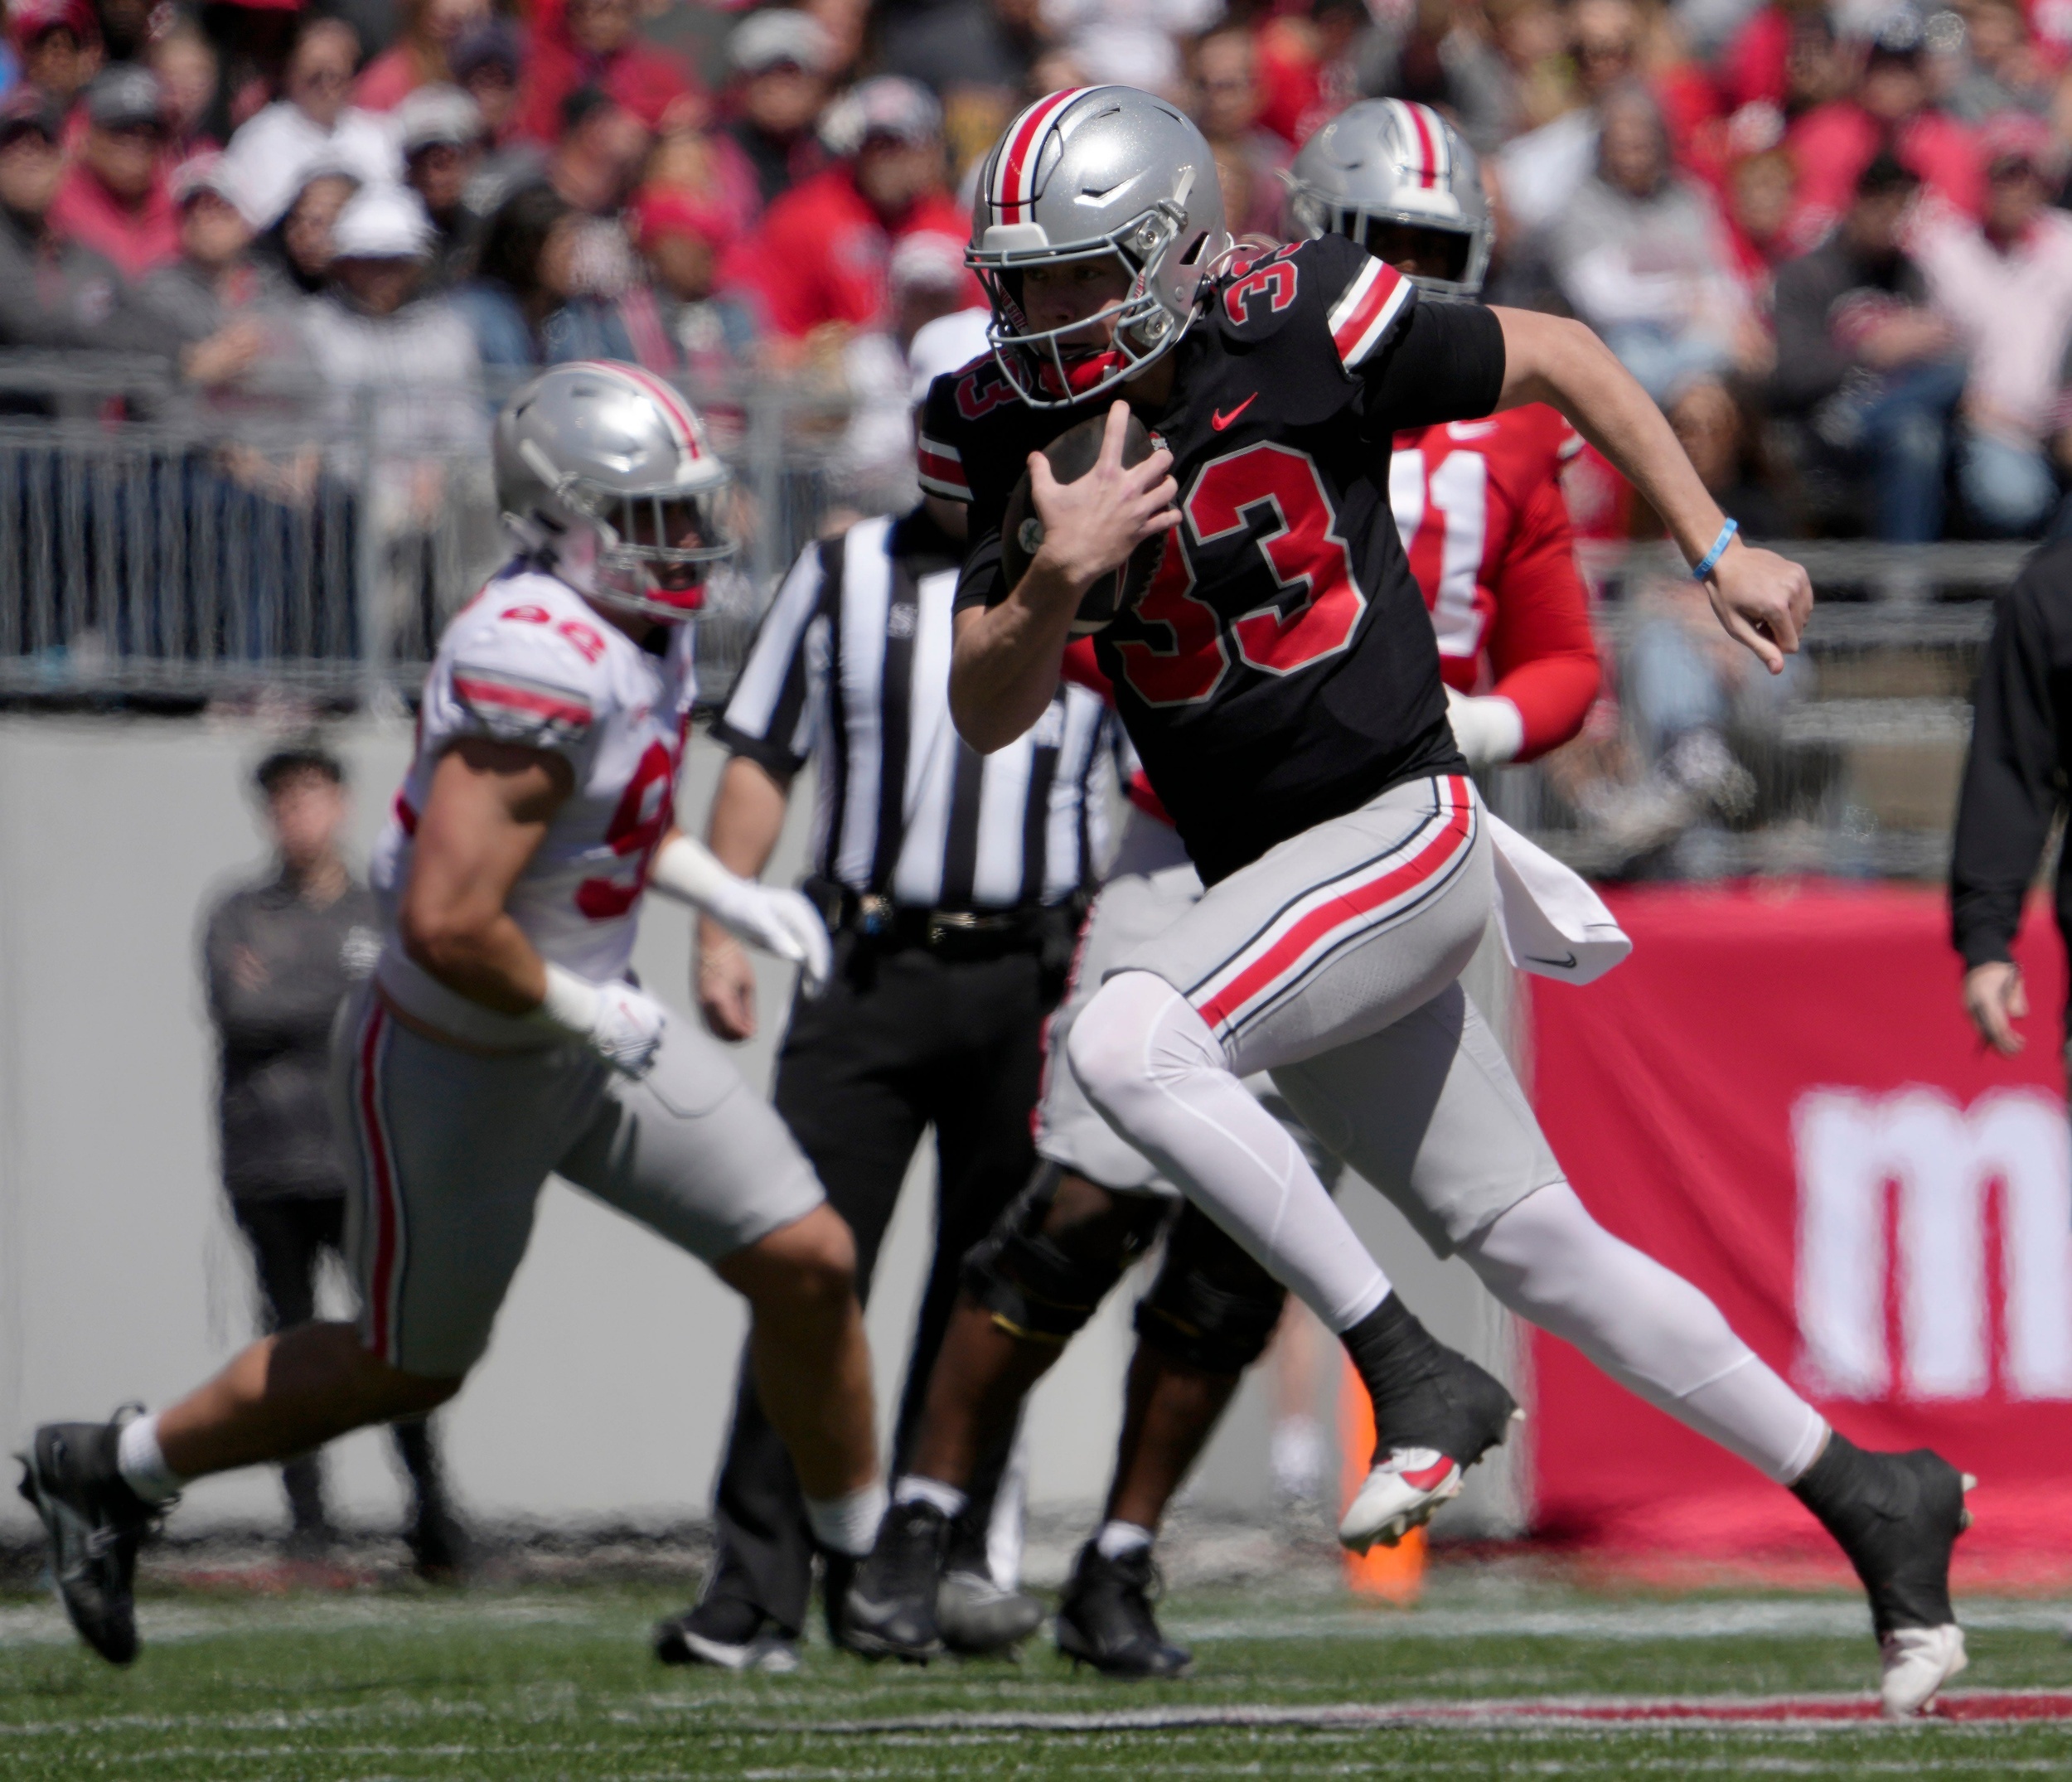 ohio state spring game takeaways: defense shines, question at quarterback remains